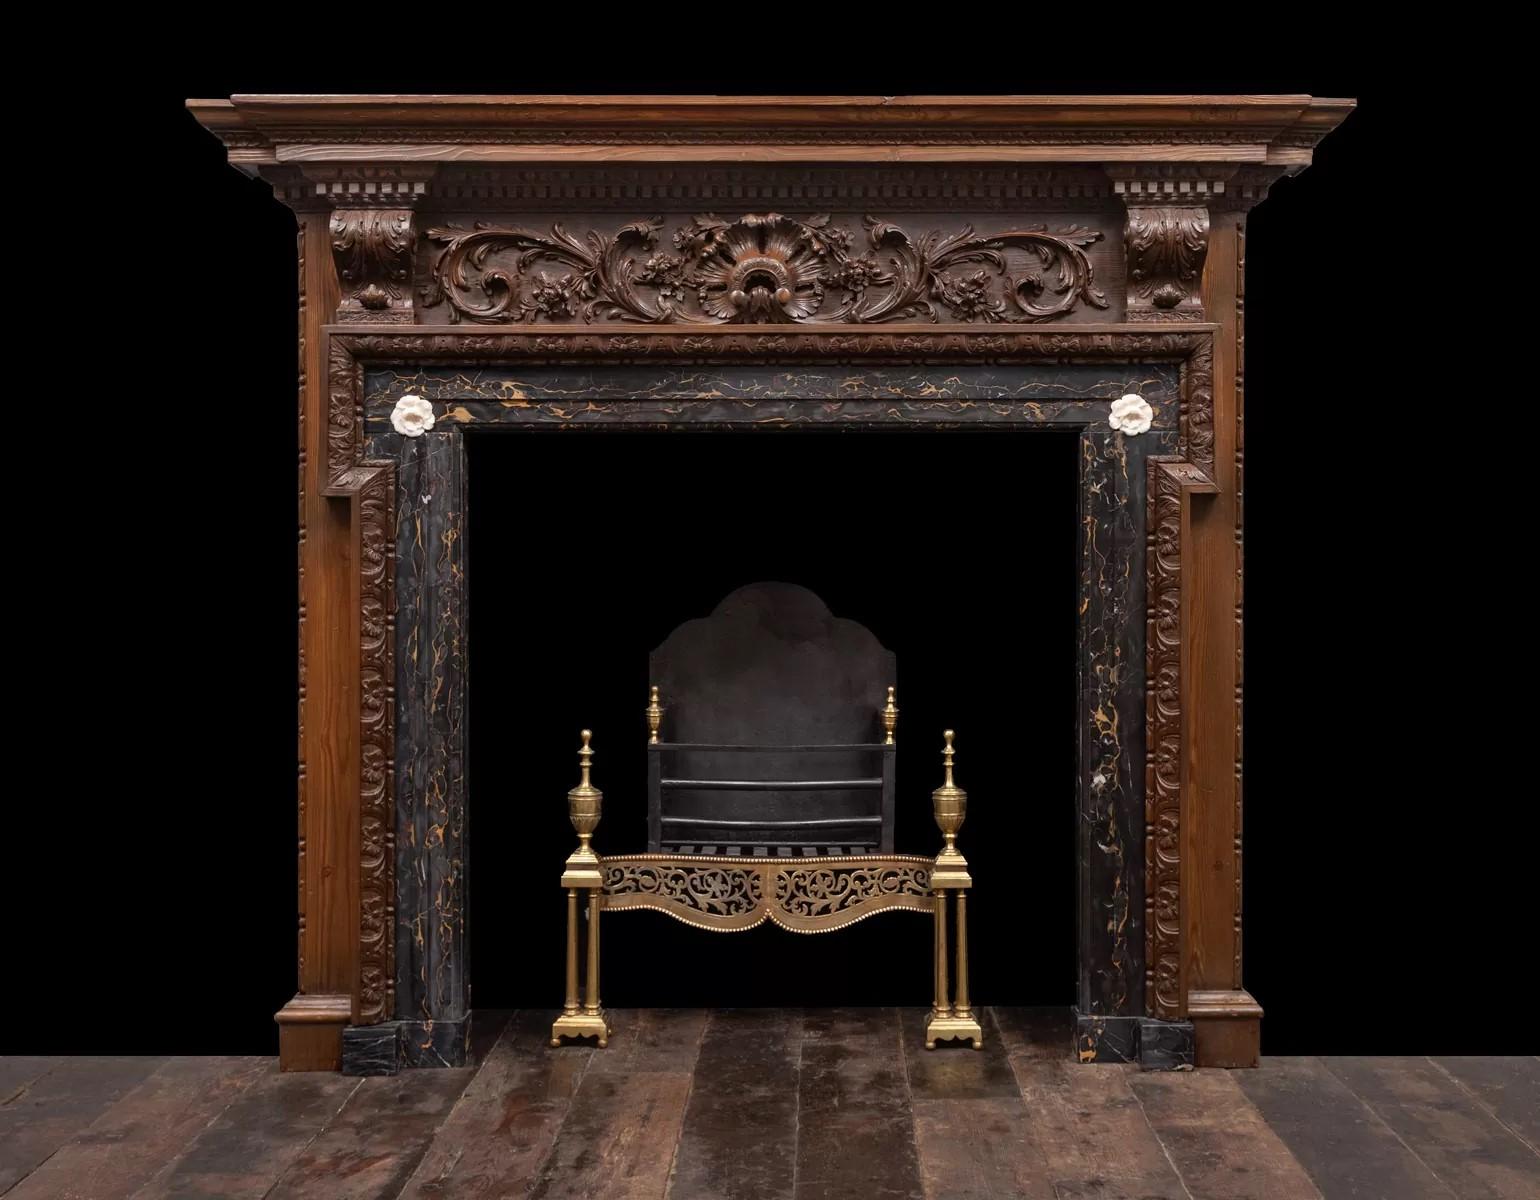 A very good George II carved pine fire surround with Portoro marble interior.
Palladian in style and period, with a well carved Rococo decorated frieze, between two acanthus corbels and under a stepped shelf carved on several layers. 

Circa 1750